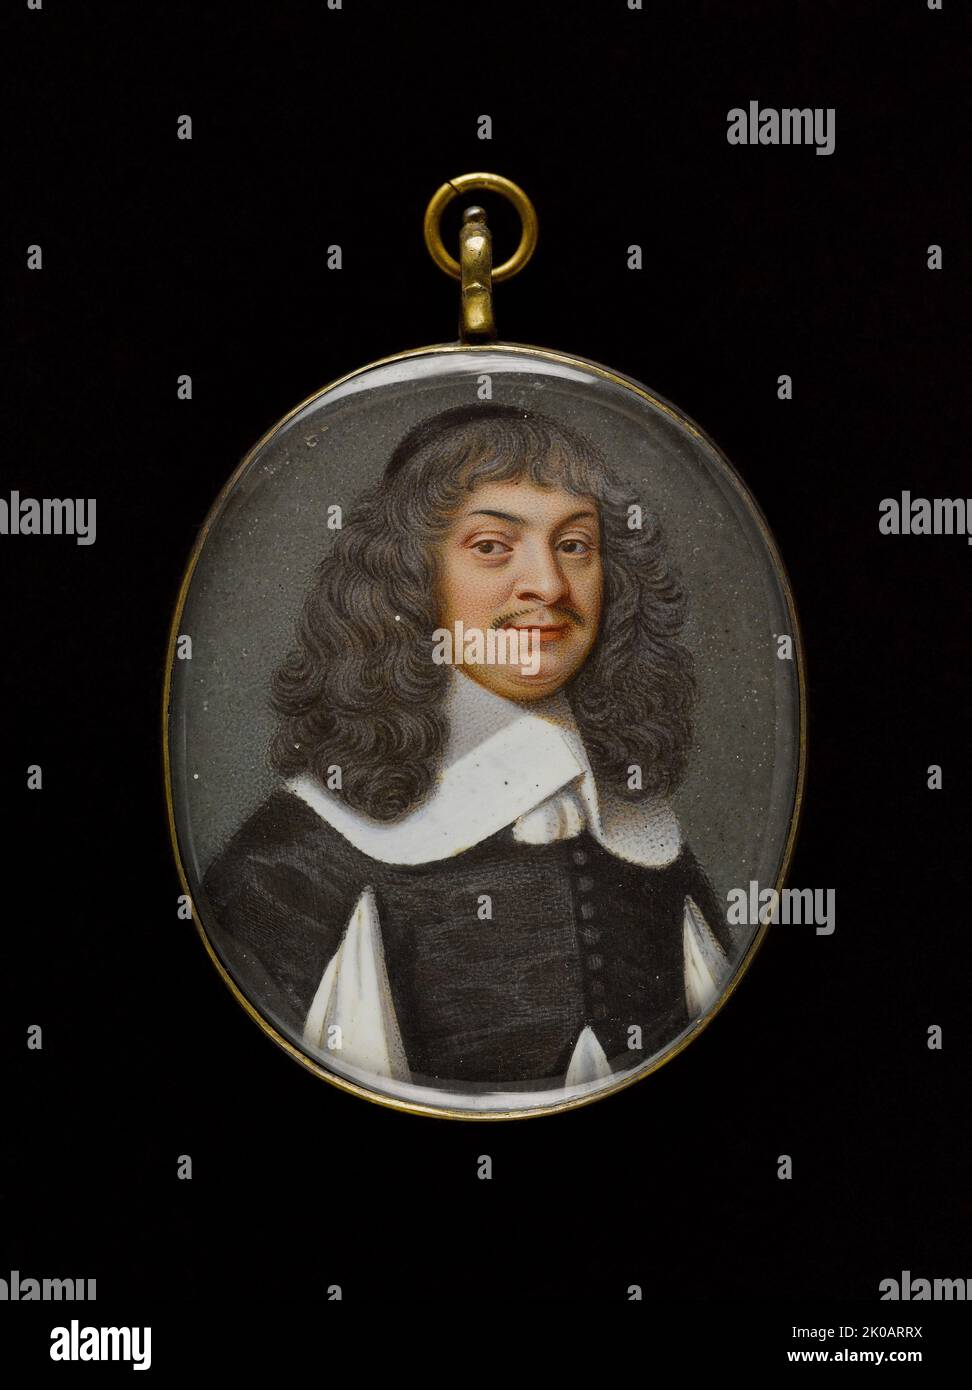 Portrait of the President of Lamoignon, between 1750 and 1765. Stock Photo